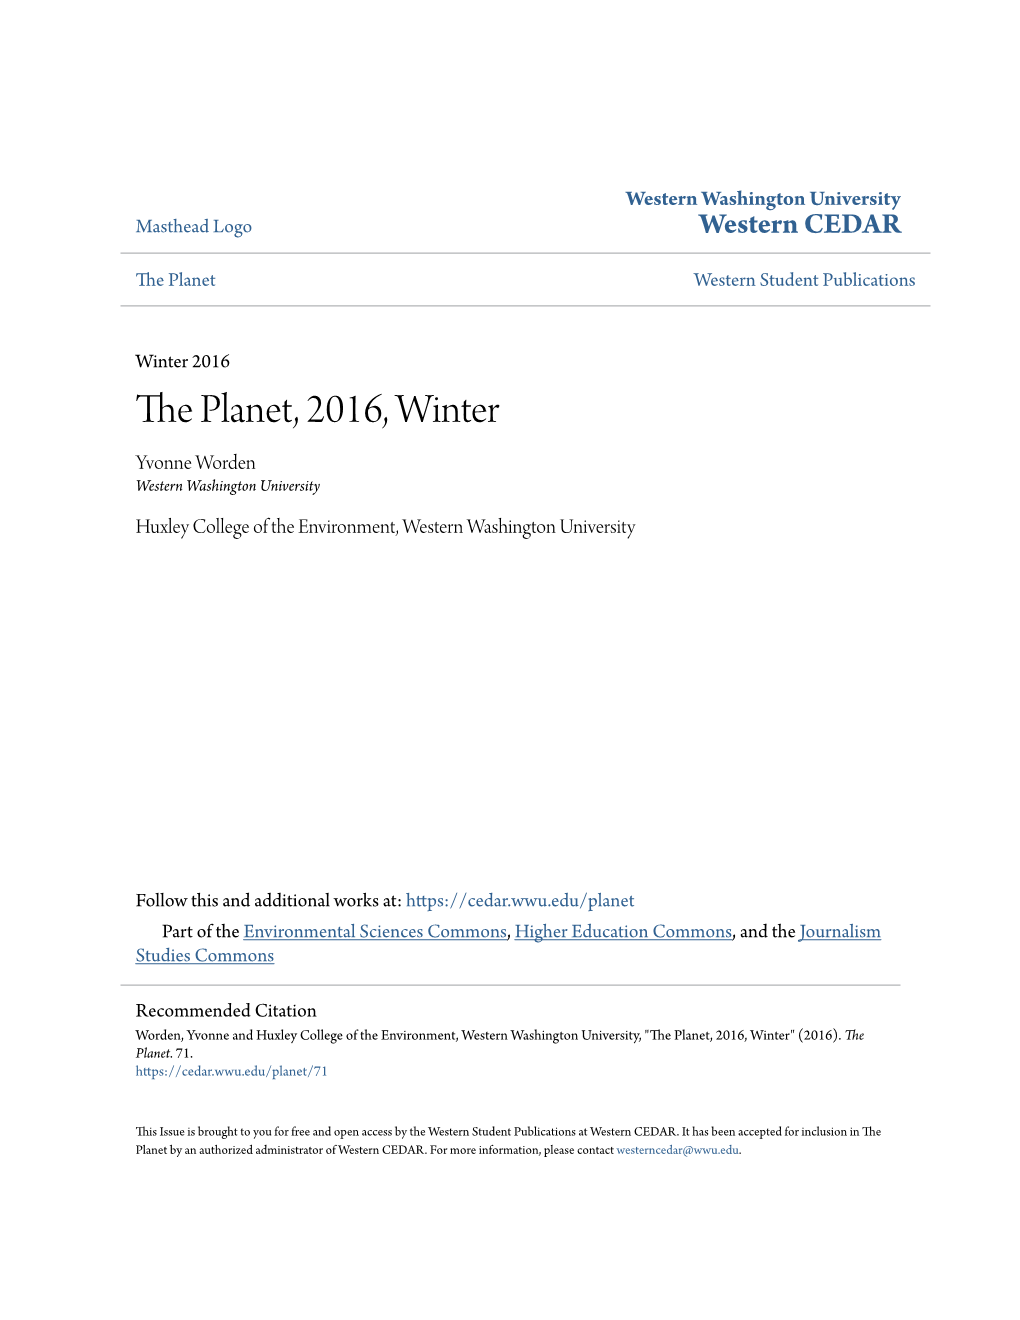 The Planet, 2016, Winter